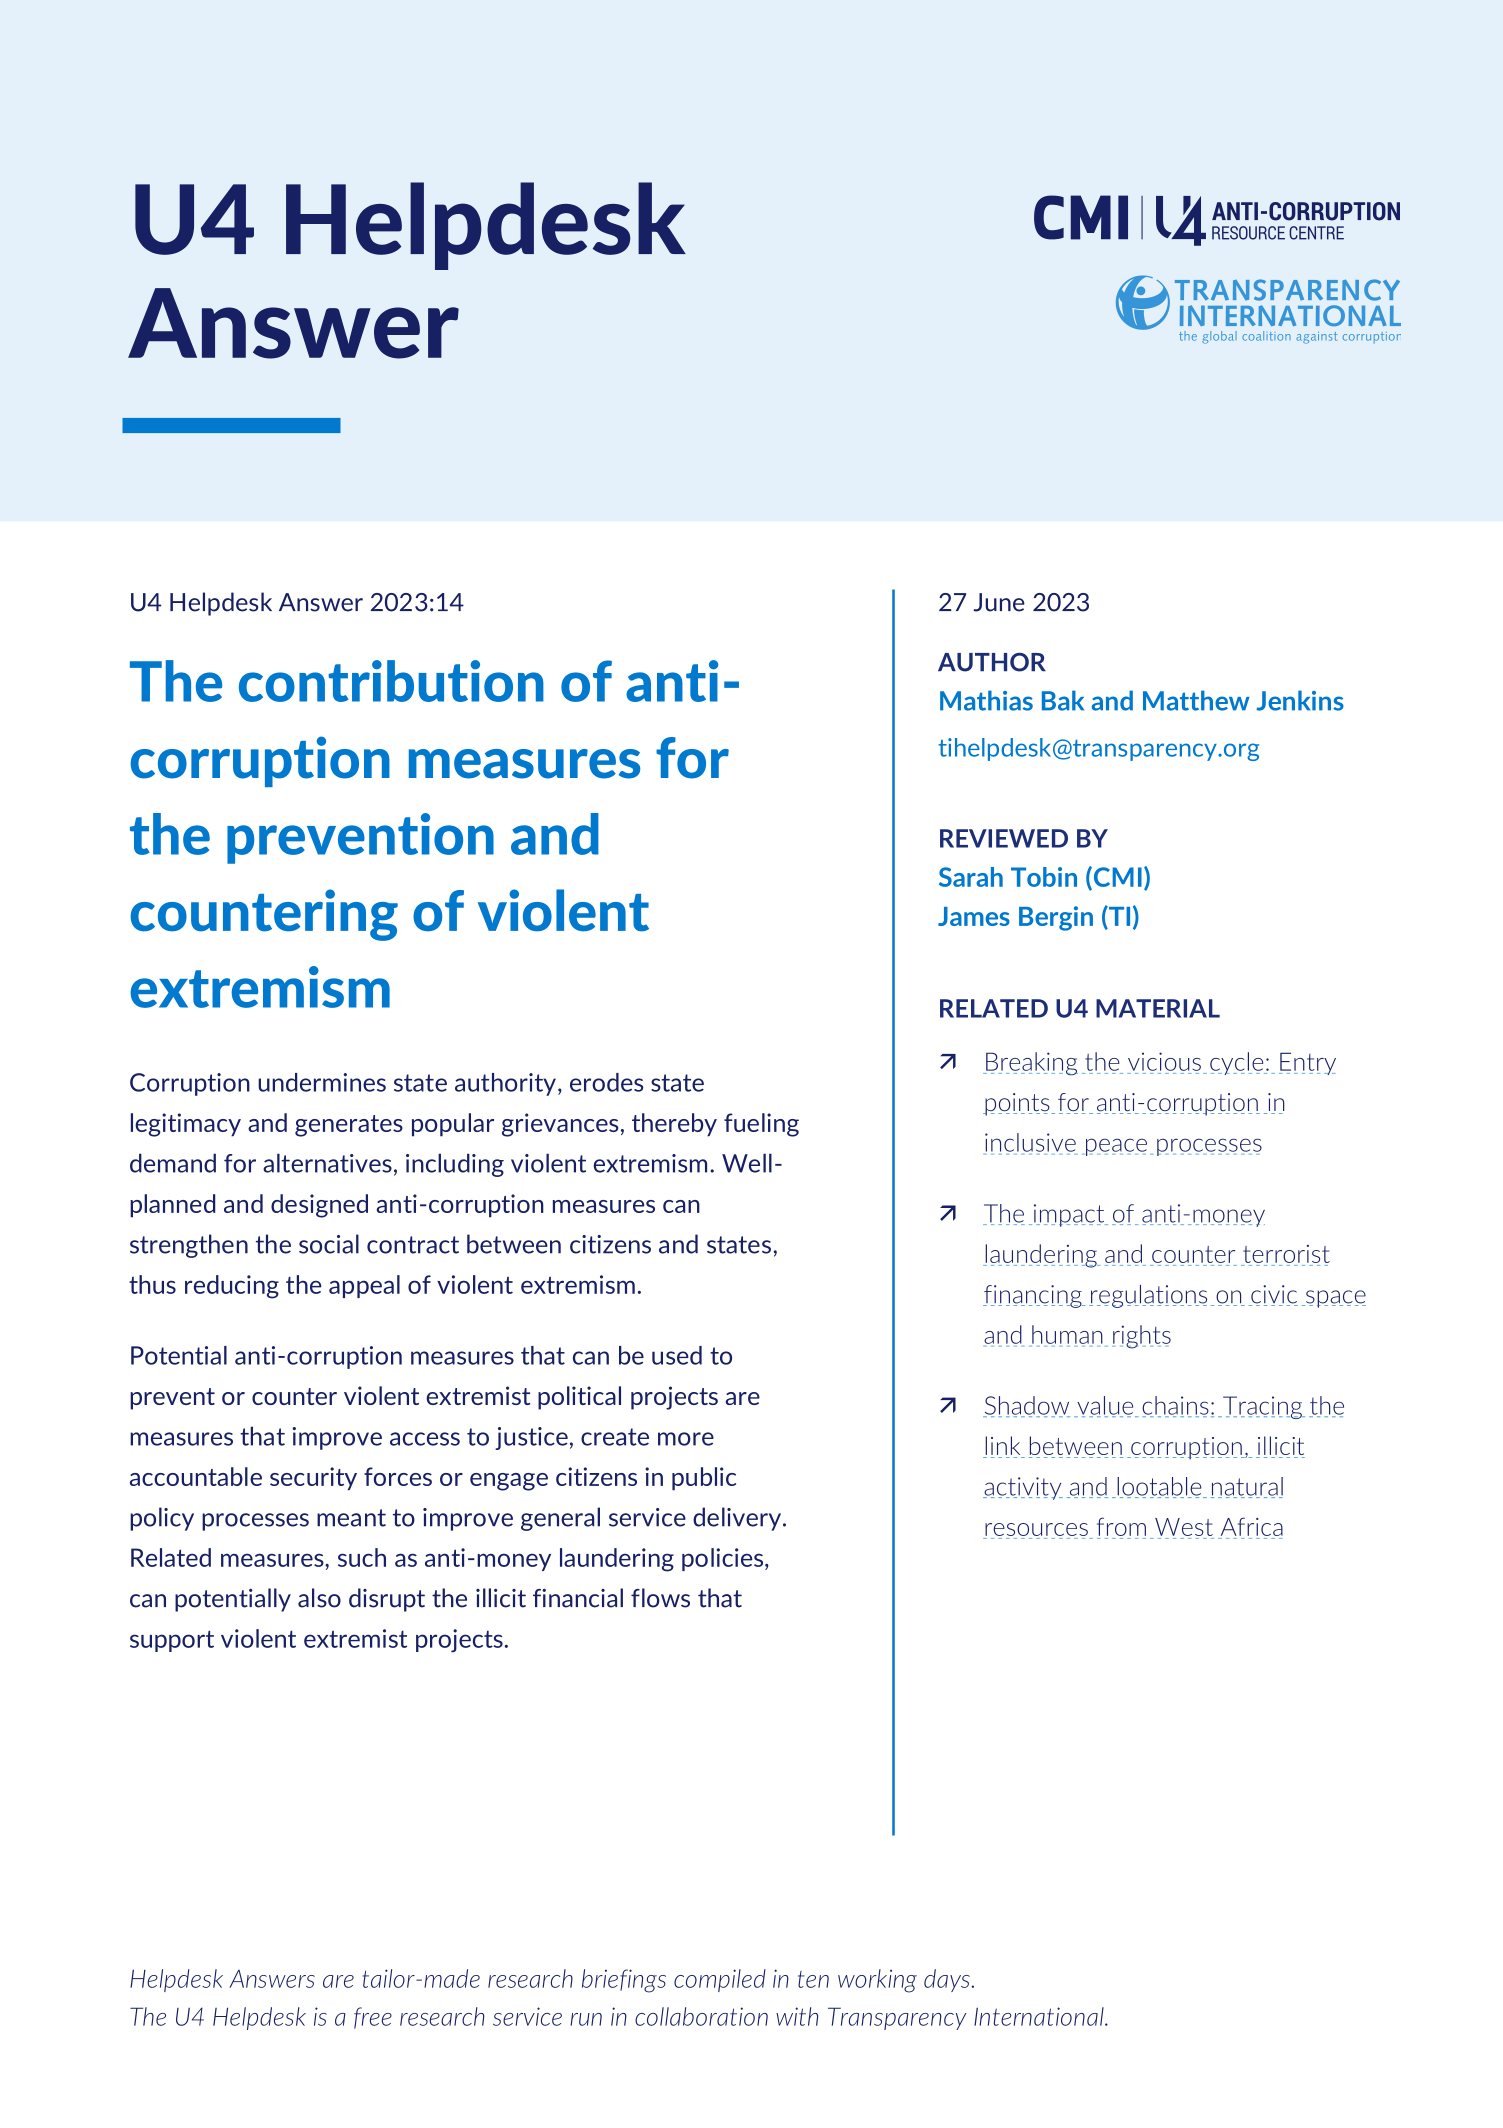 The contribution of anti-corruption measures for the prevention and countering of violent extremism